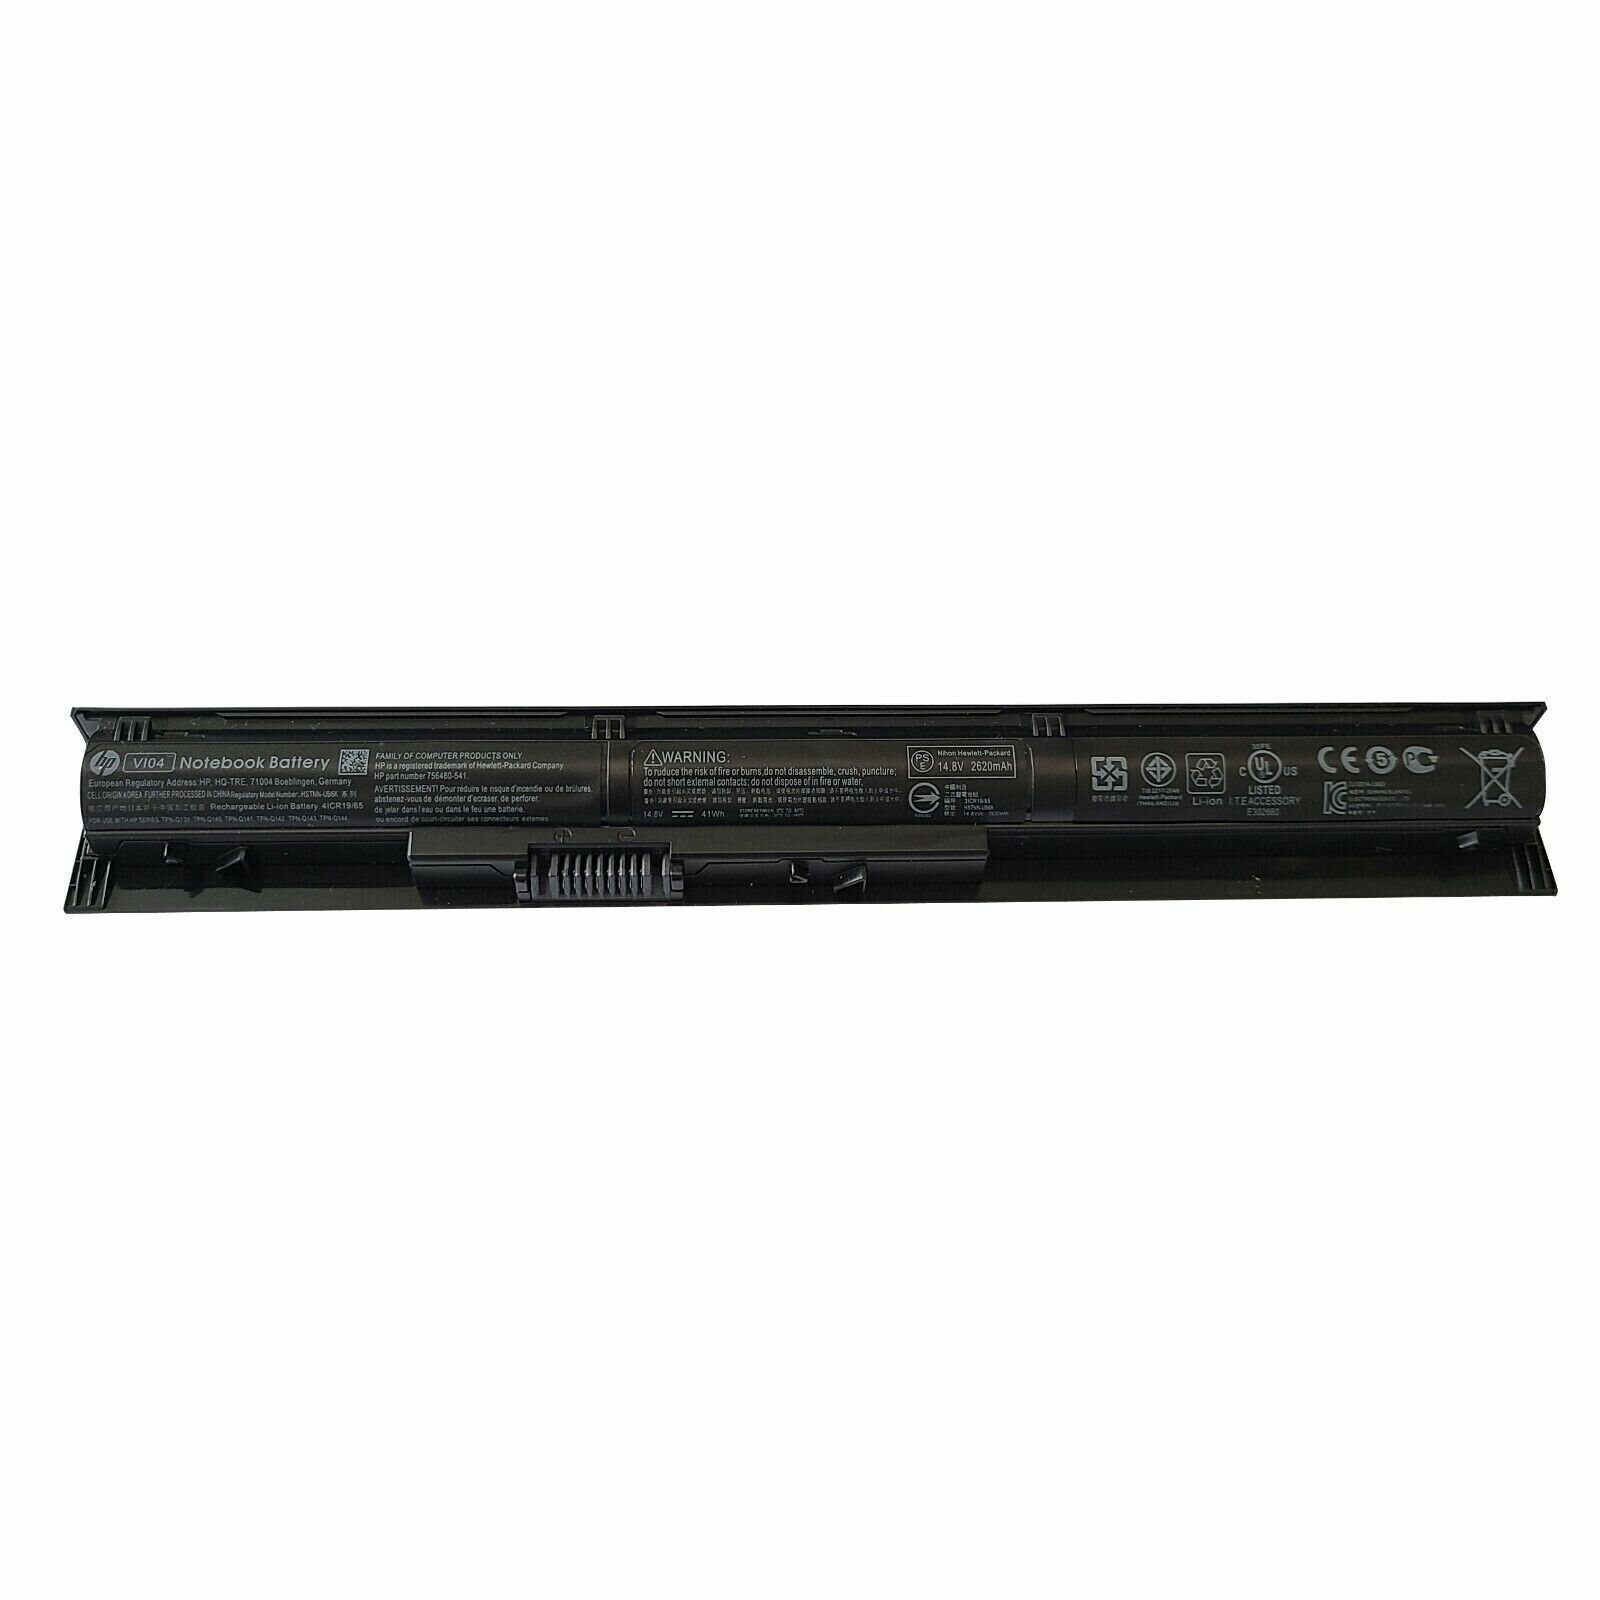 Genuine 41Wh VI04 Battery For HP Pavilion 14 15 17 Series 756478-851 756745-001